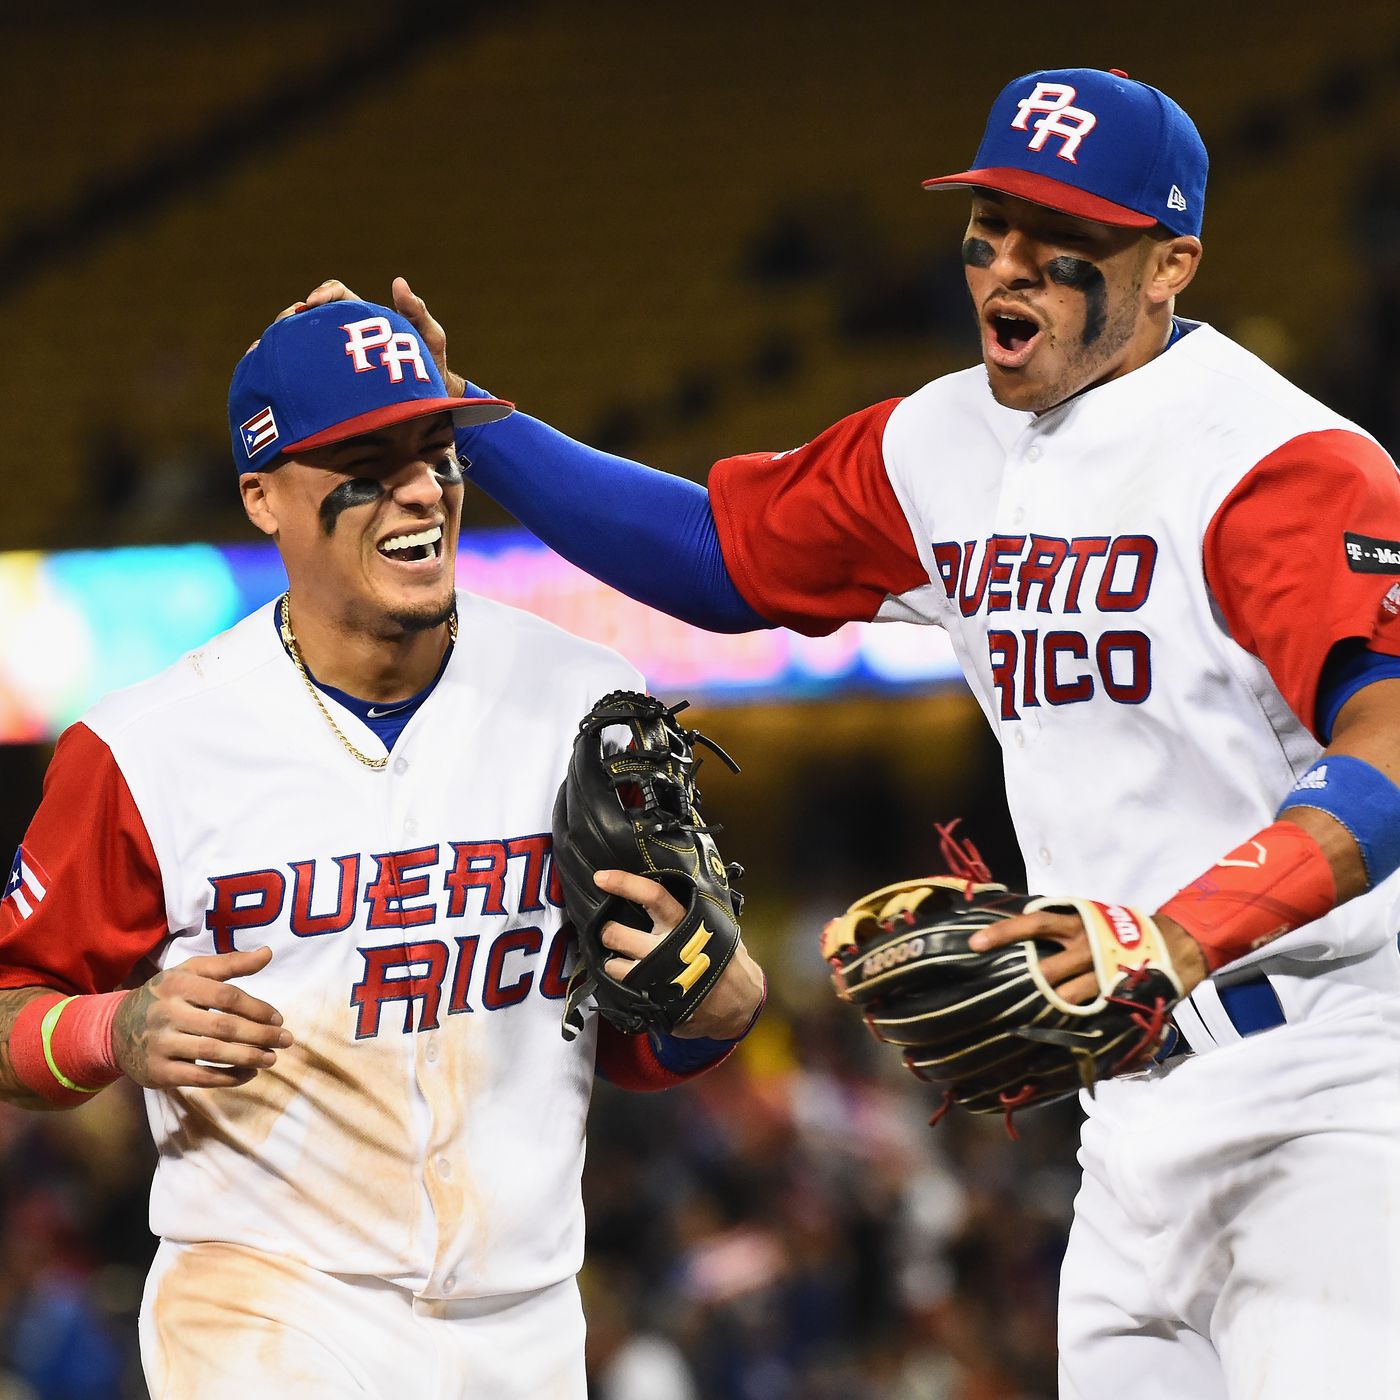 WBC 2017 Roundup 3 20: Puerto Rico Advances, Xander Heads Back Home The Monster